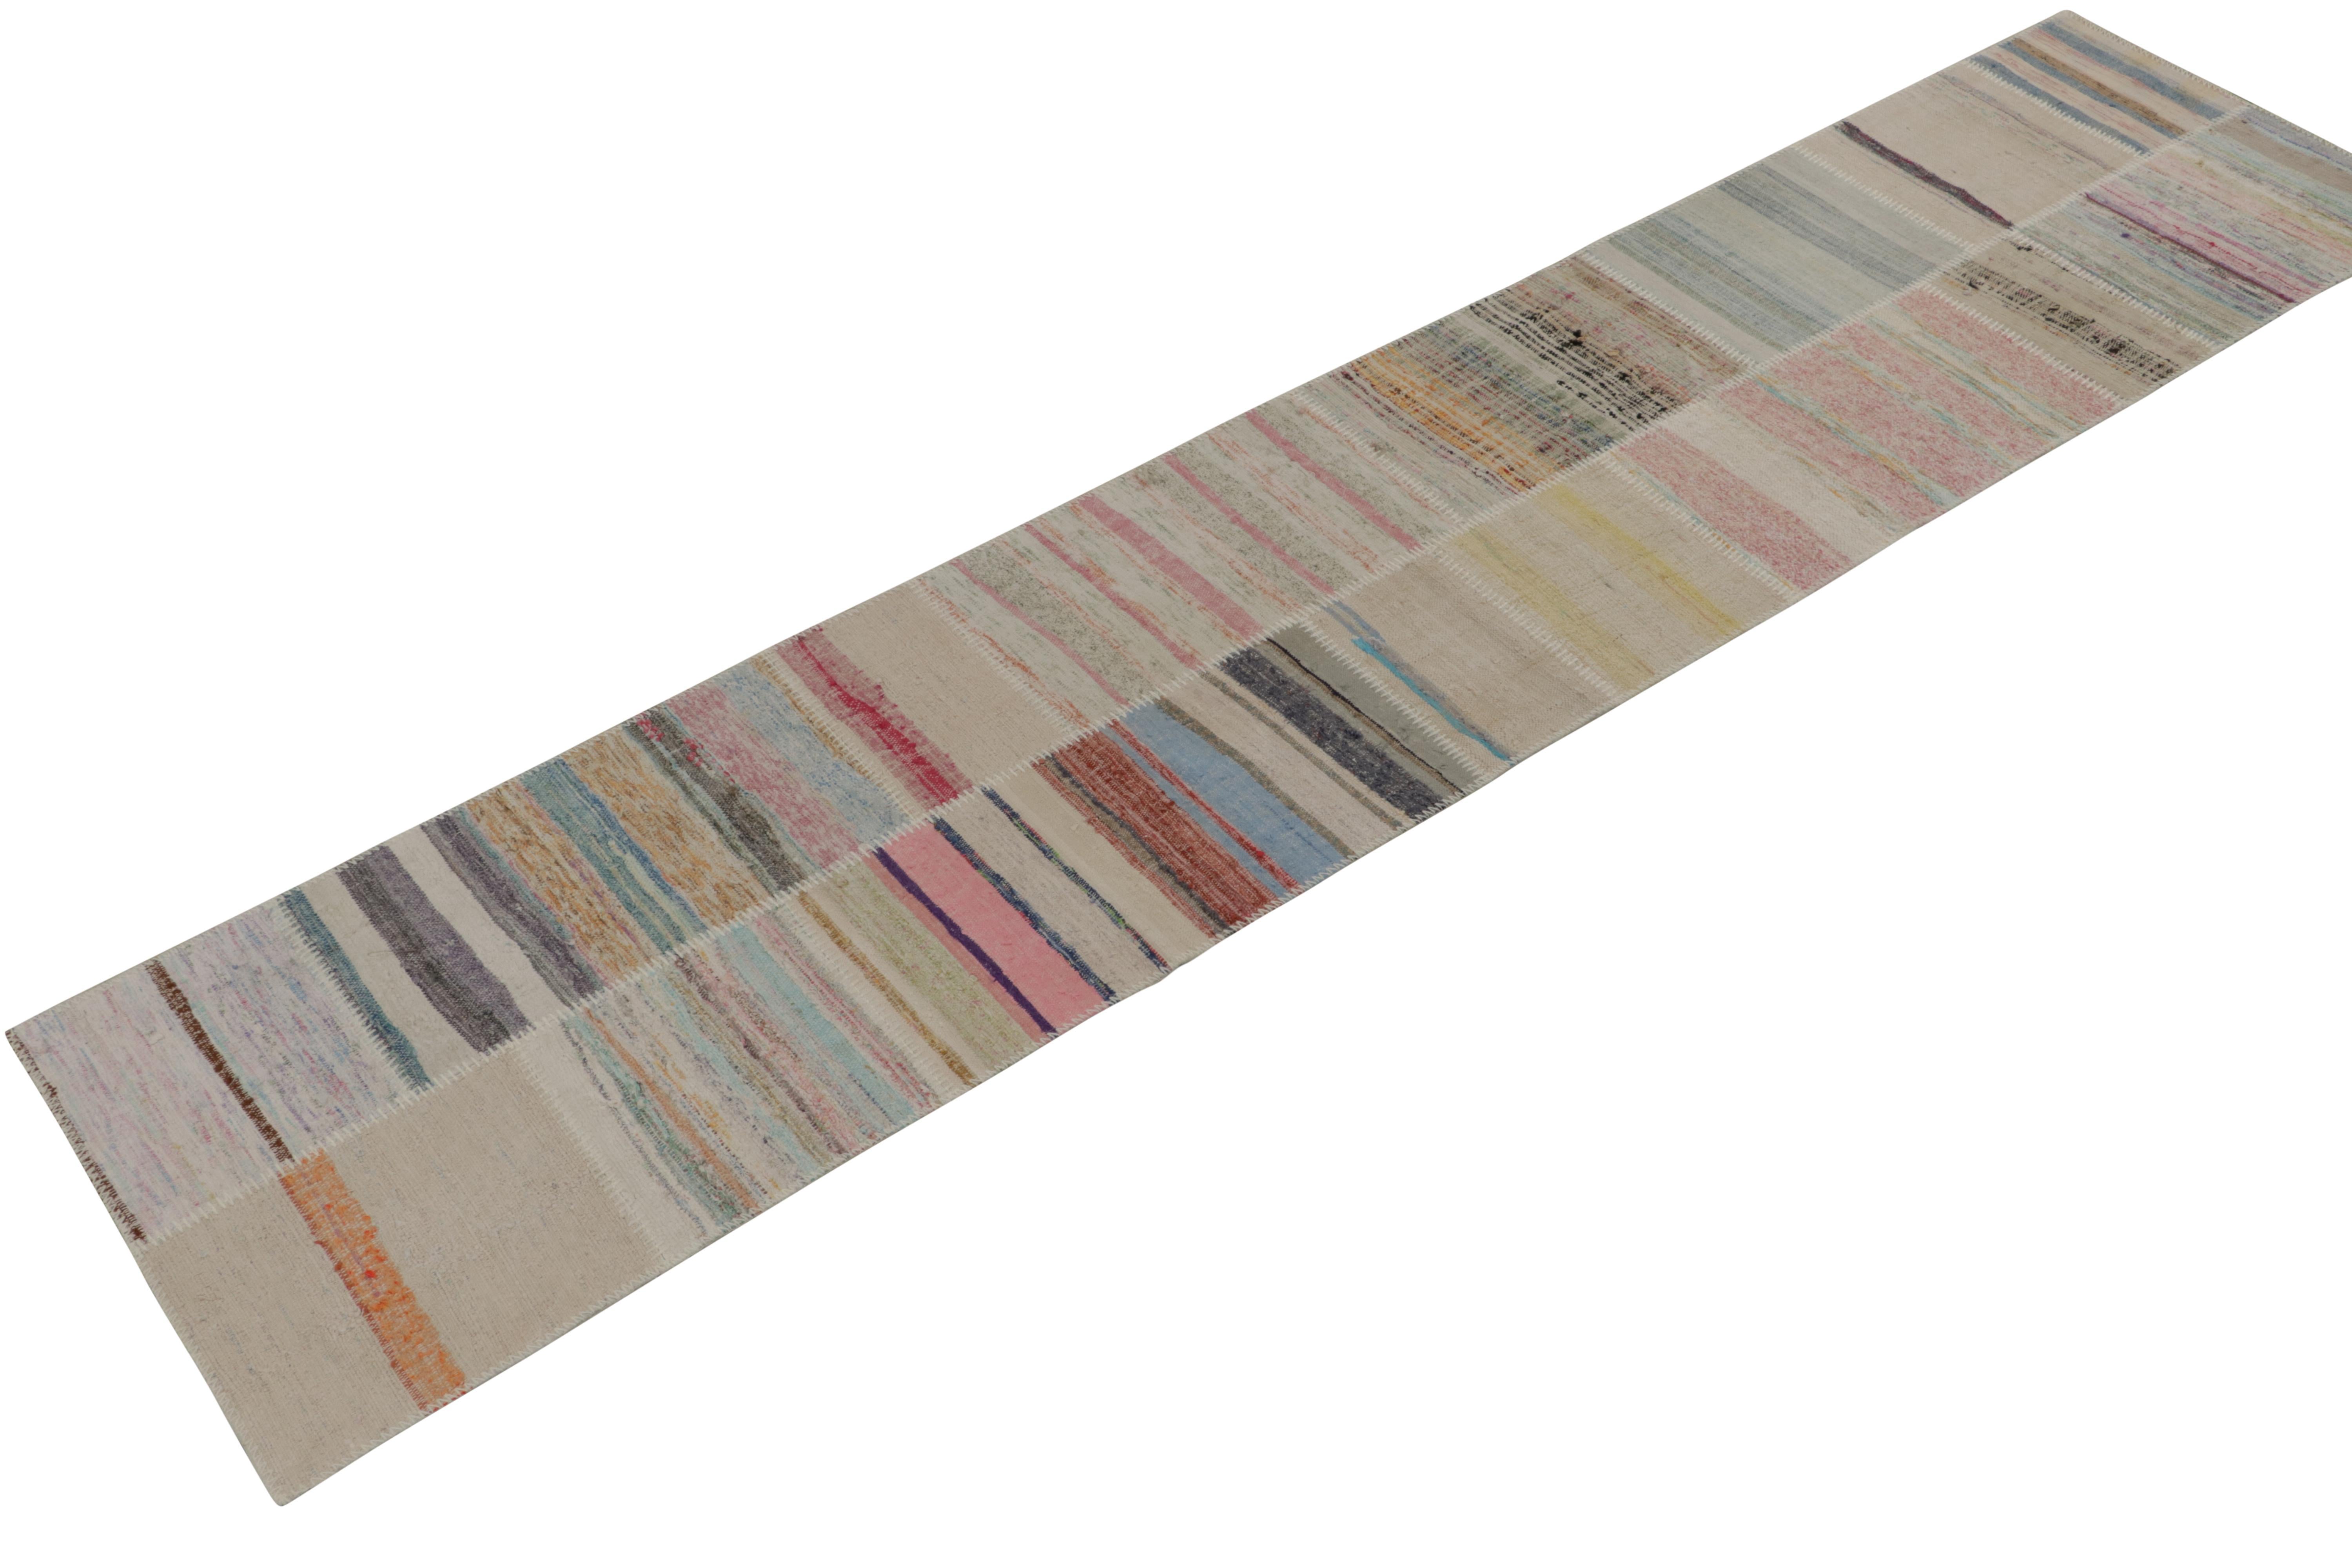 Handwoven in wool, Rug & Kilim presents a 3x12 runner from their innovative new patchwork kilim collection. 

On the Design: 

This flat weave technique repurposes vintage yarns in polychromatic stripes and striae, achieving a playful look with